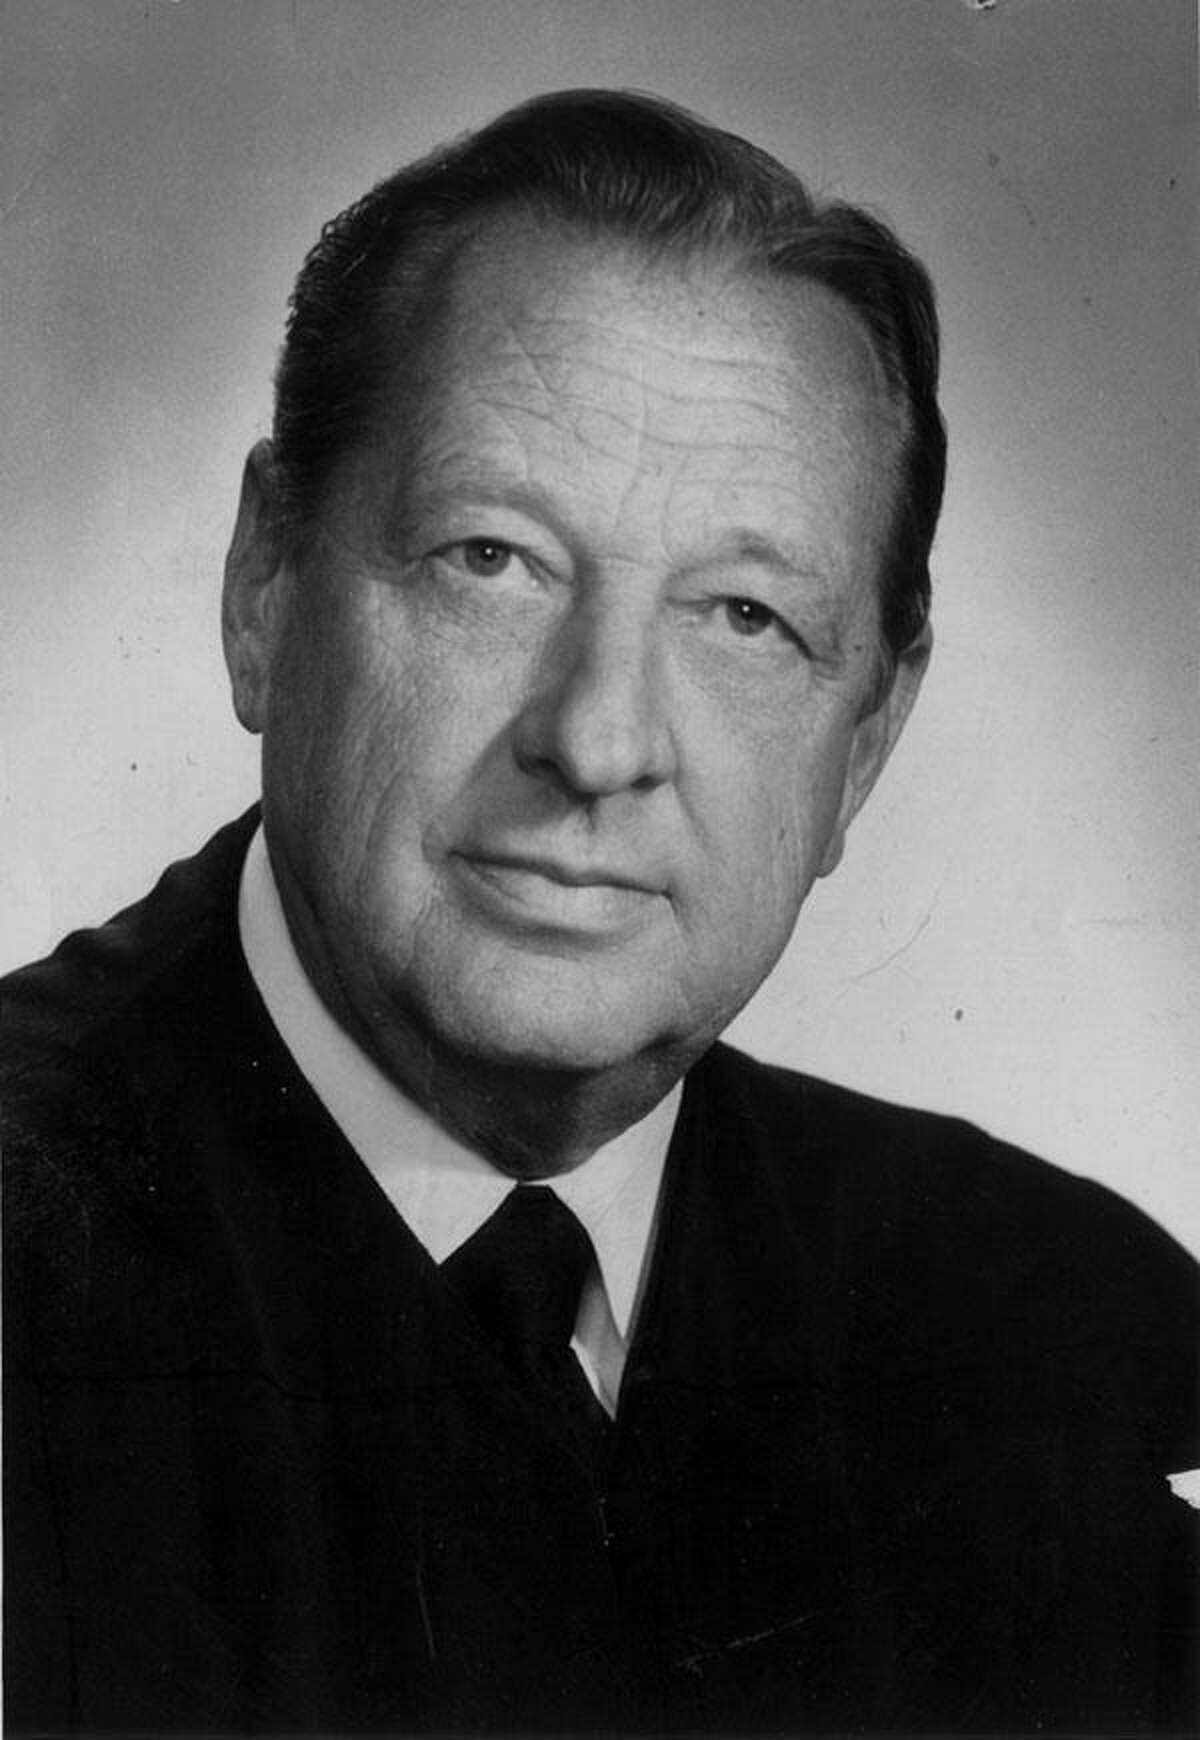 U.S. District Judge John H. Wood was assassinated in San Antonio on  May 29, 1979.